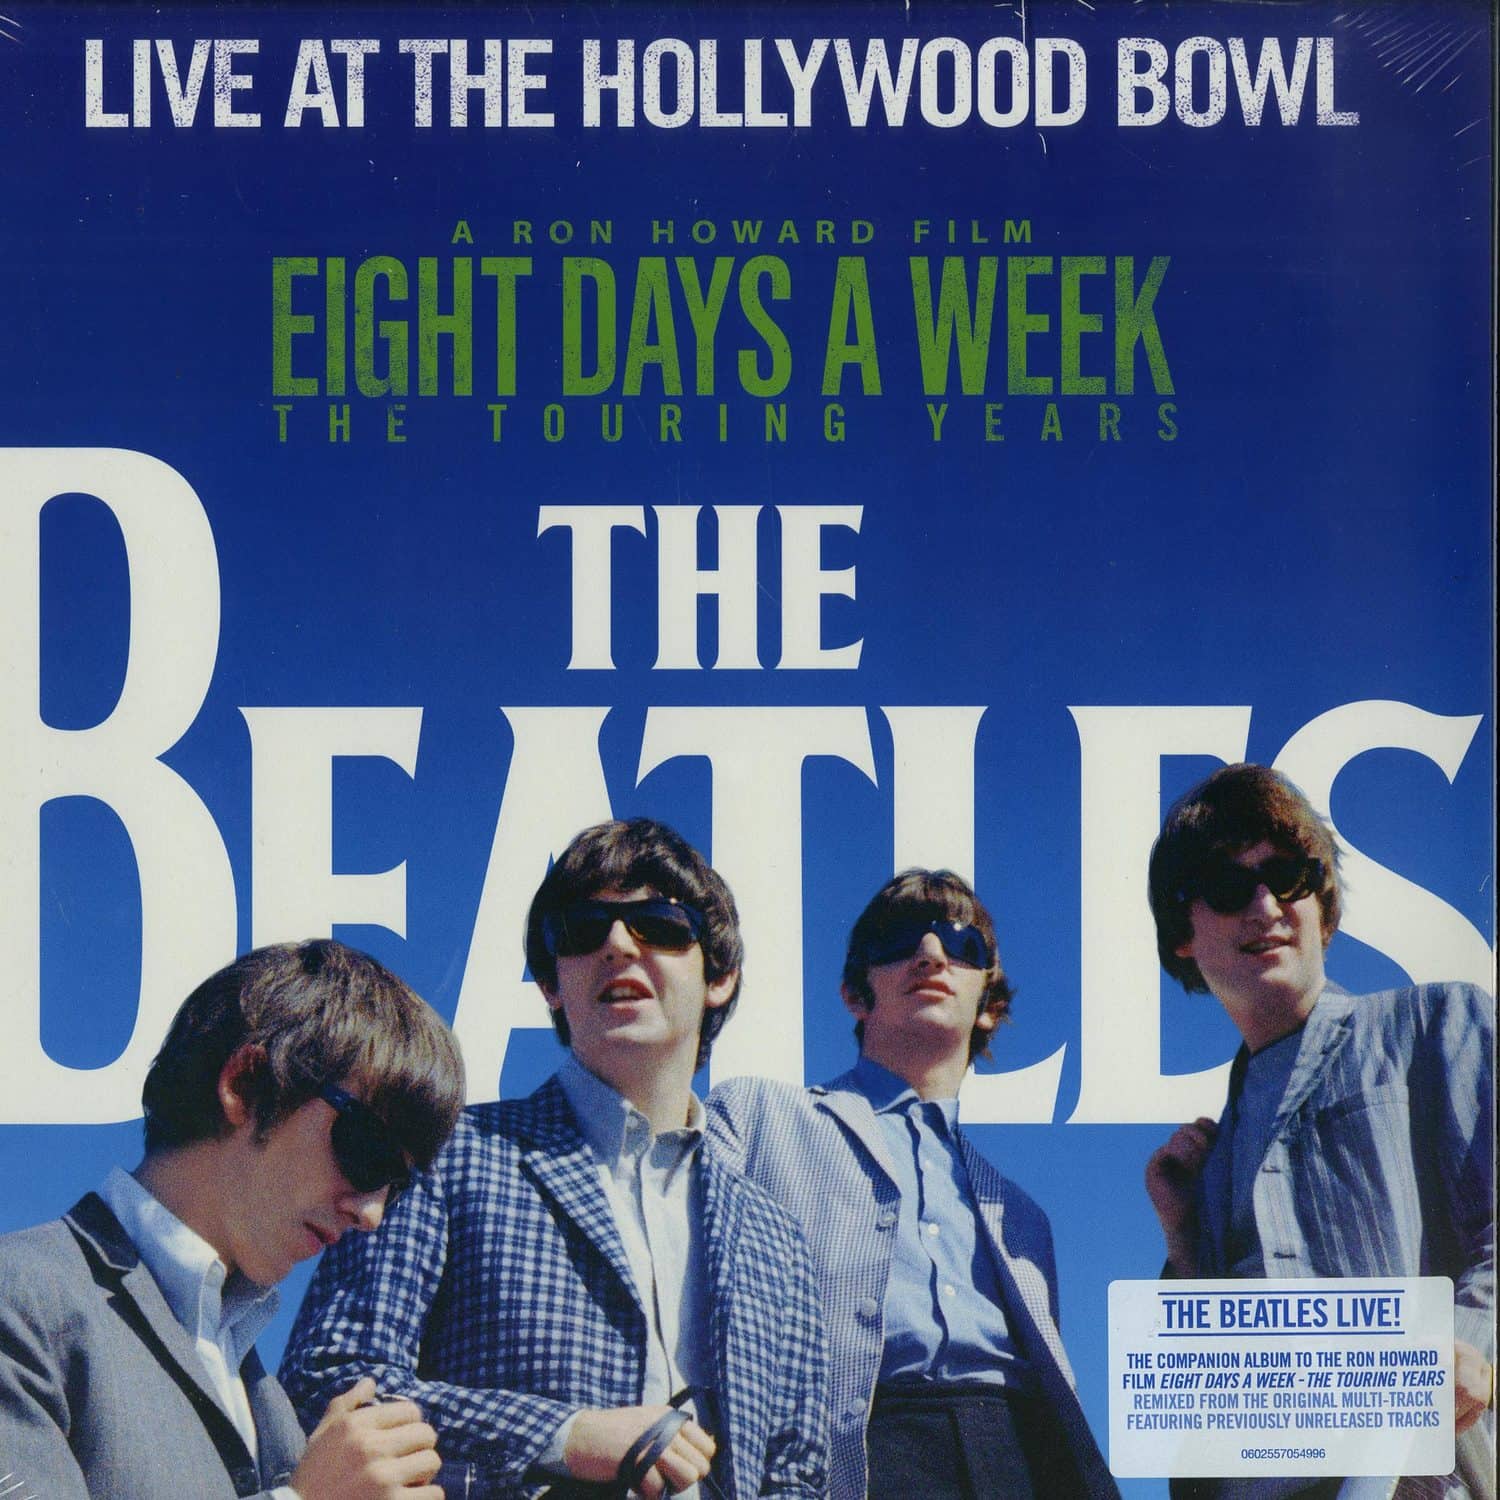 The Beatles - LIVE AT THE HOLLYWOOD BOWL 